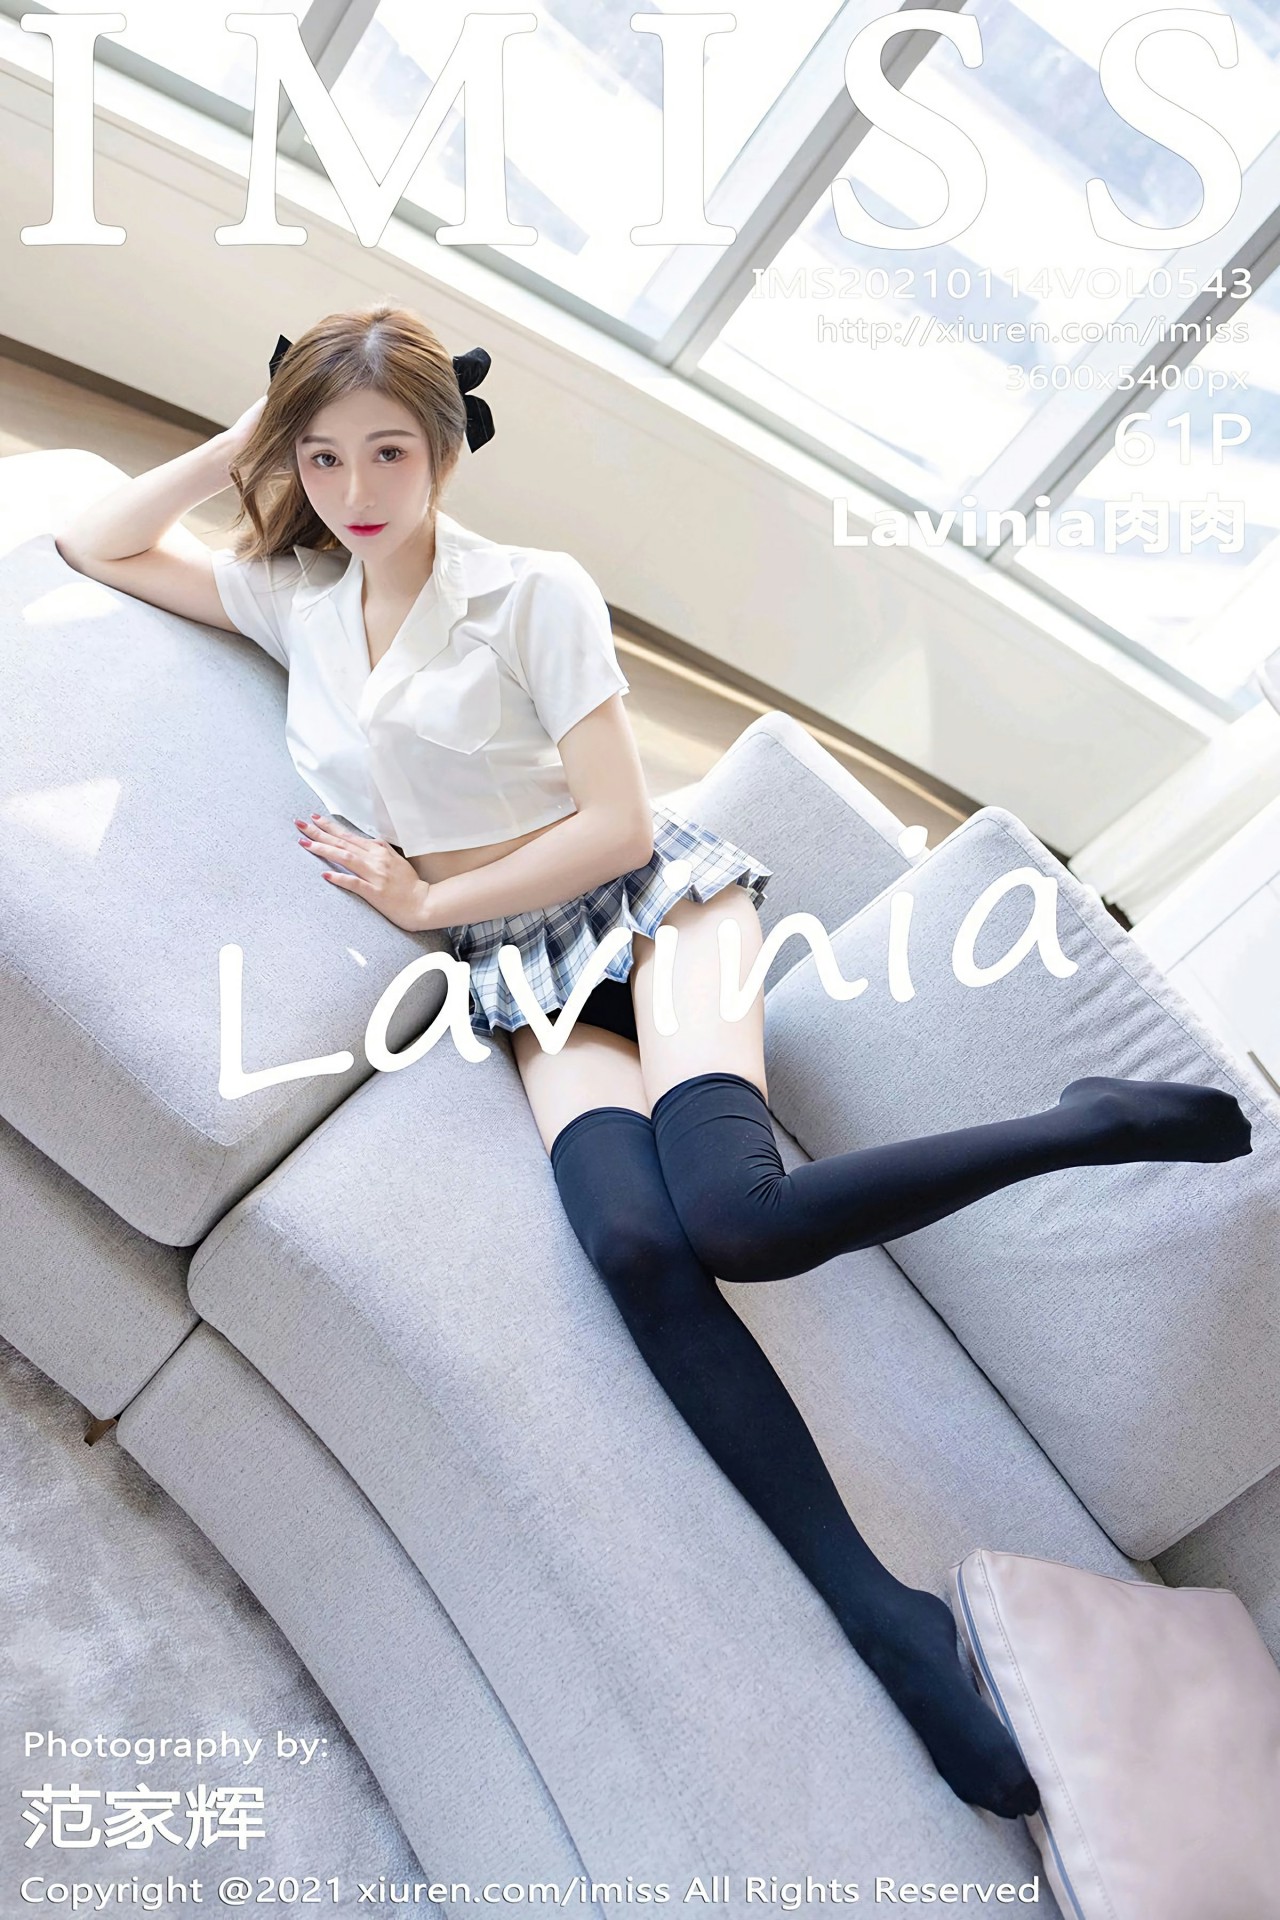 [IMISS爱蜜社] 2021.01.14 VOL.543 <strong>Lavinia肉肉</strong>